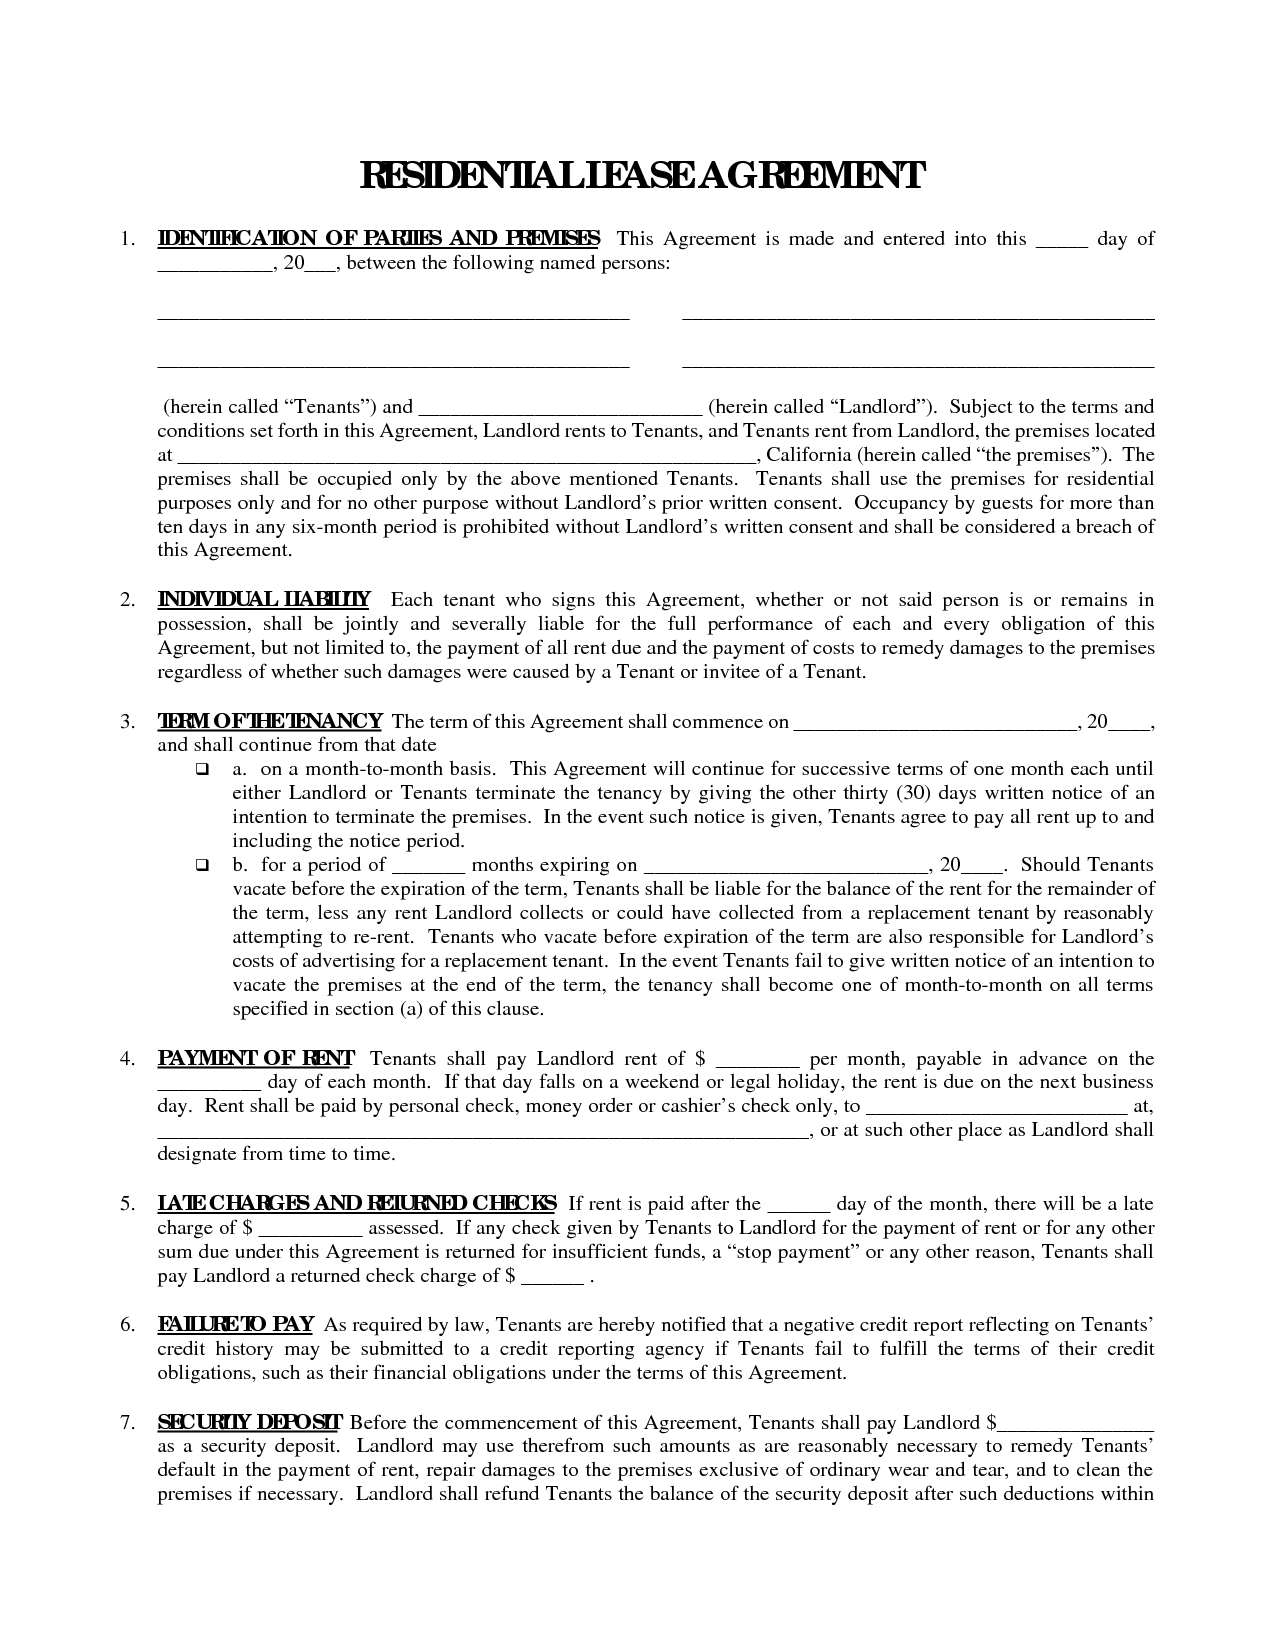 Printable Residential Free House Lease Agreement | Residential Lease - Free Printable Lease Agreement Ny